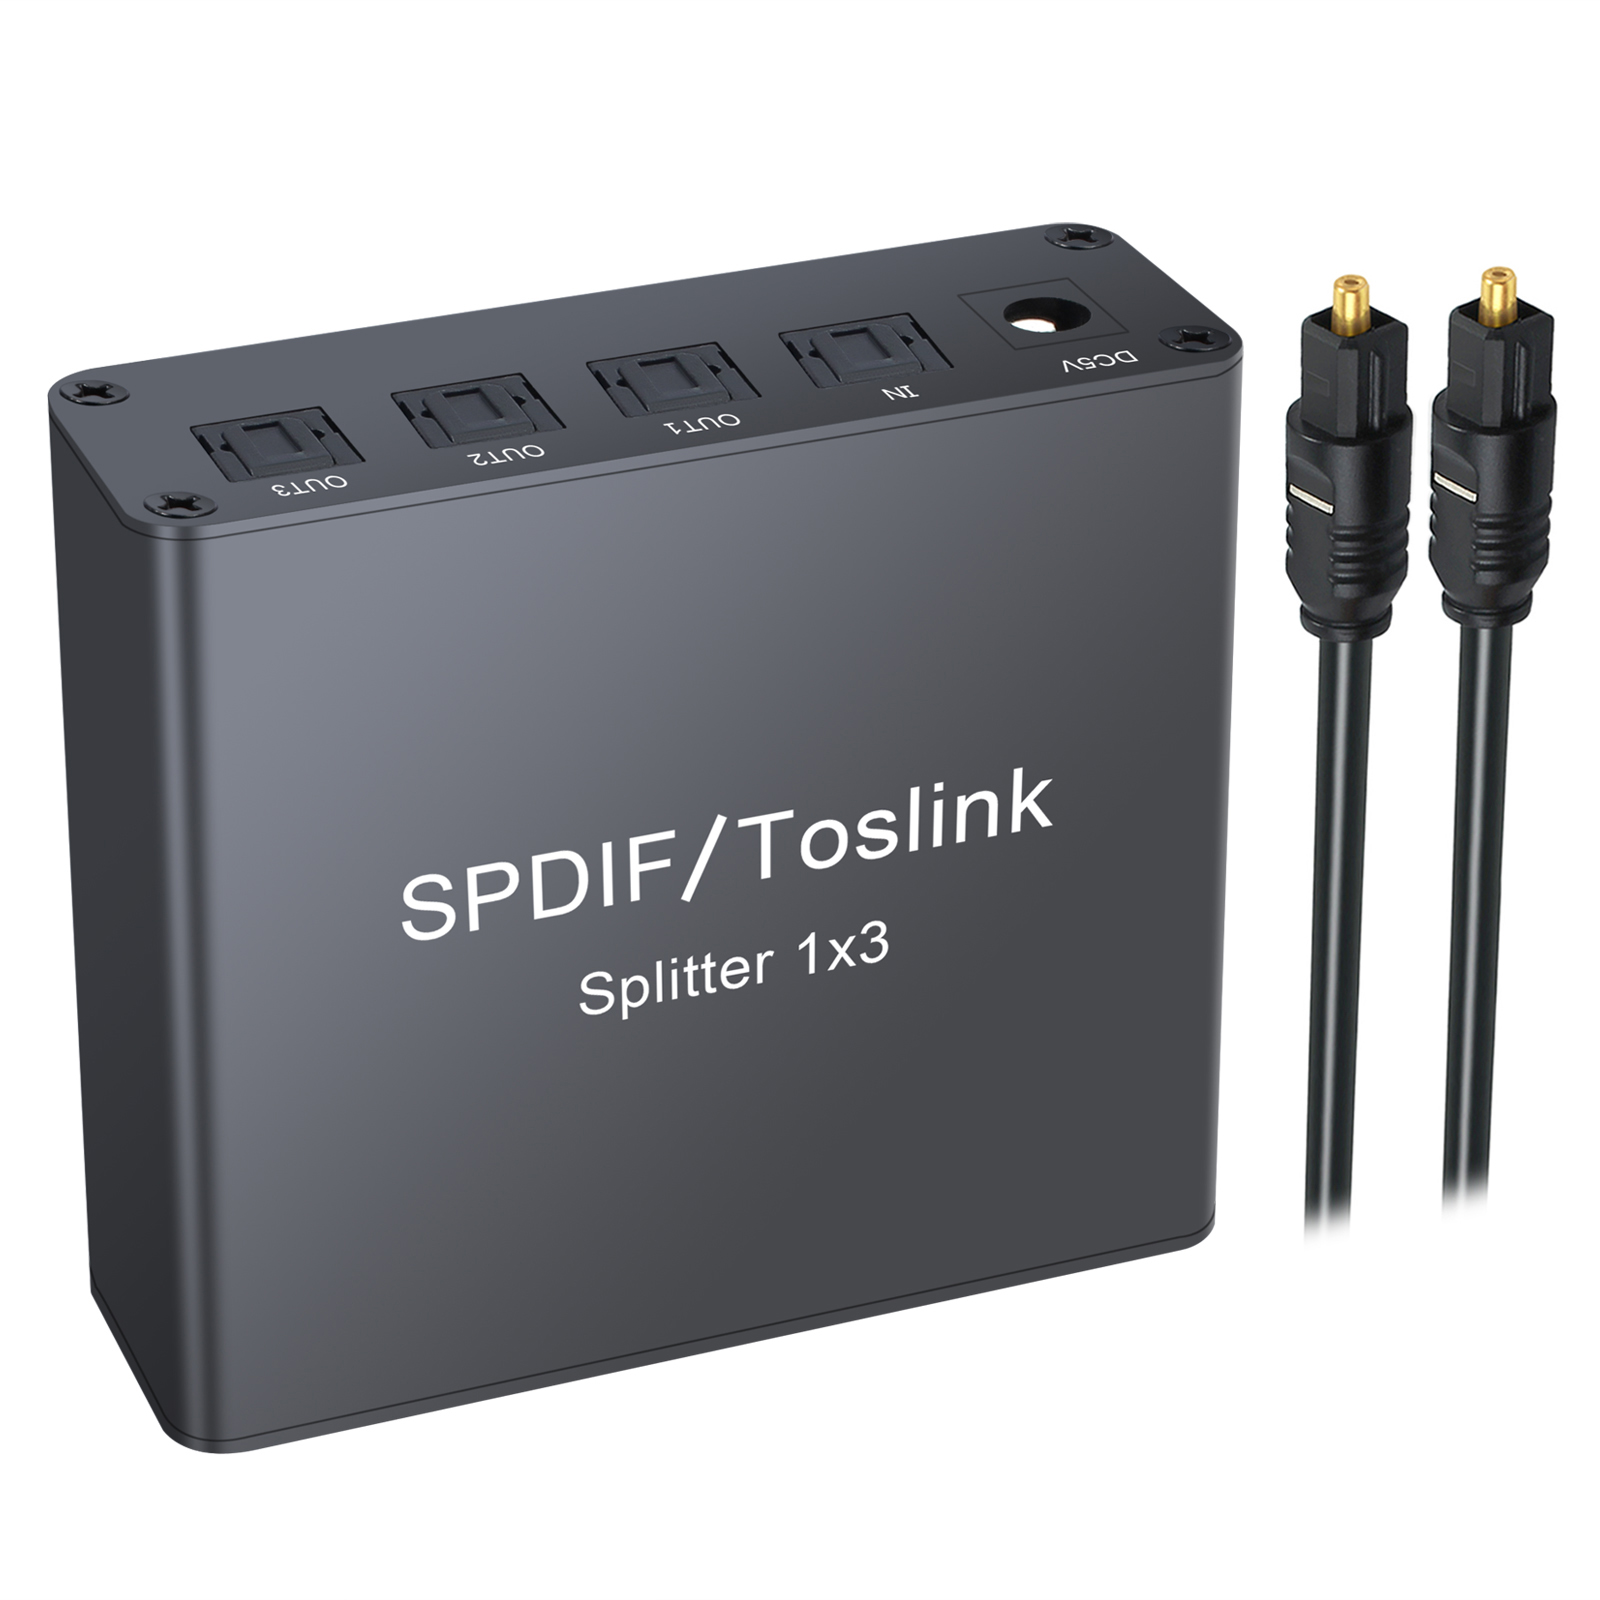 will a 1 to 3 optical audio splitter also work in reverse